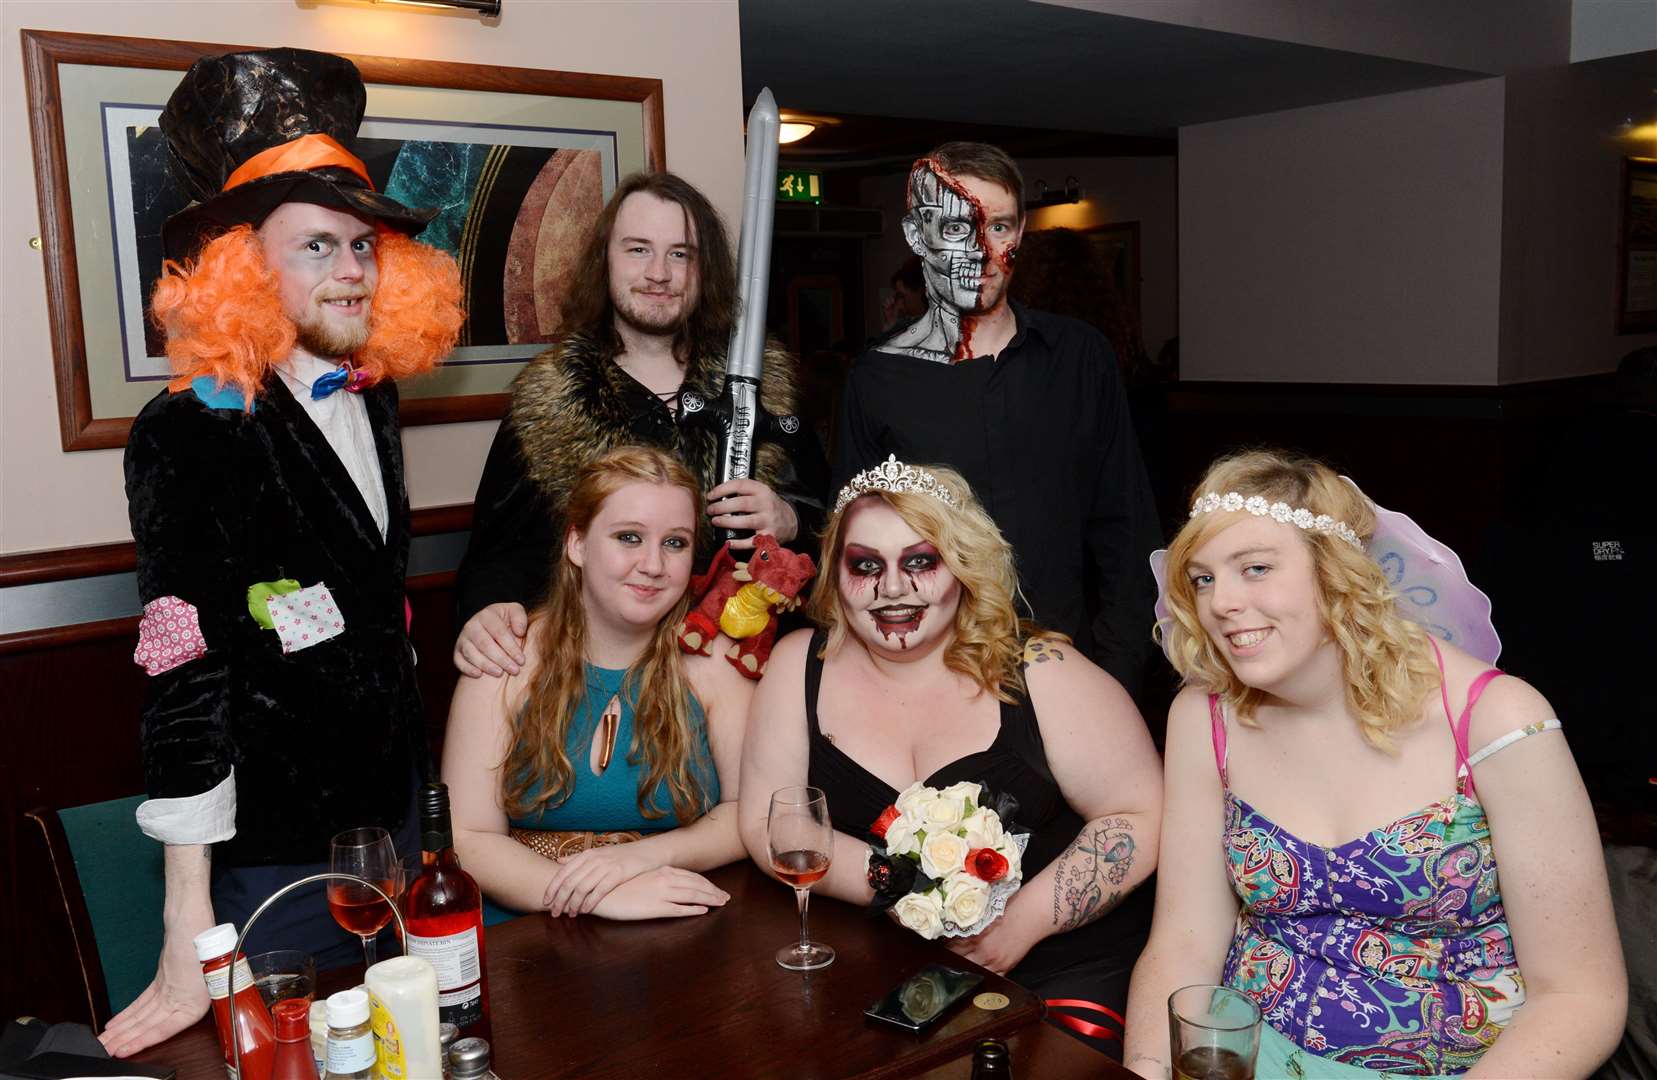 (back) Darren Napier, Keith Robinson and Ross Taylor - (front) Nicola Chalmers, Hanna Goldie and Erin Murray. CitySeen on Halloween 31/10/15. Picture: Alison White